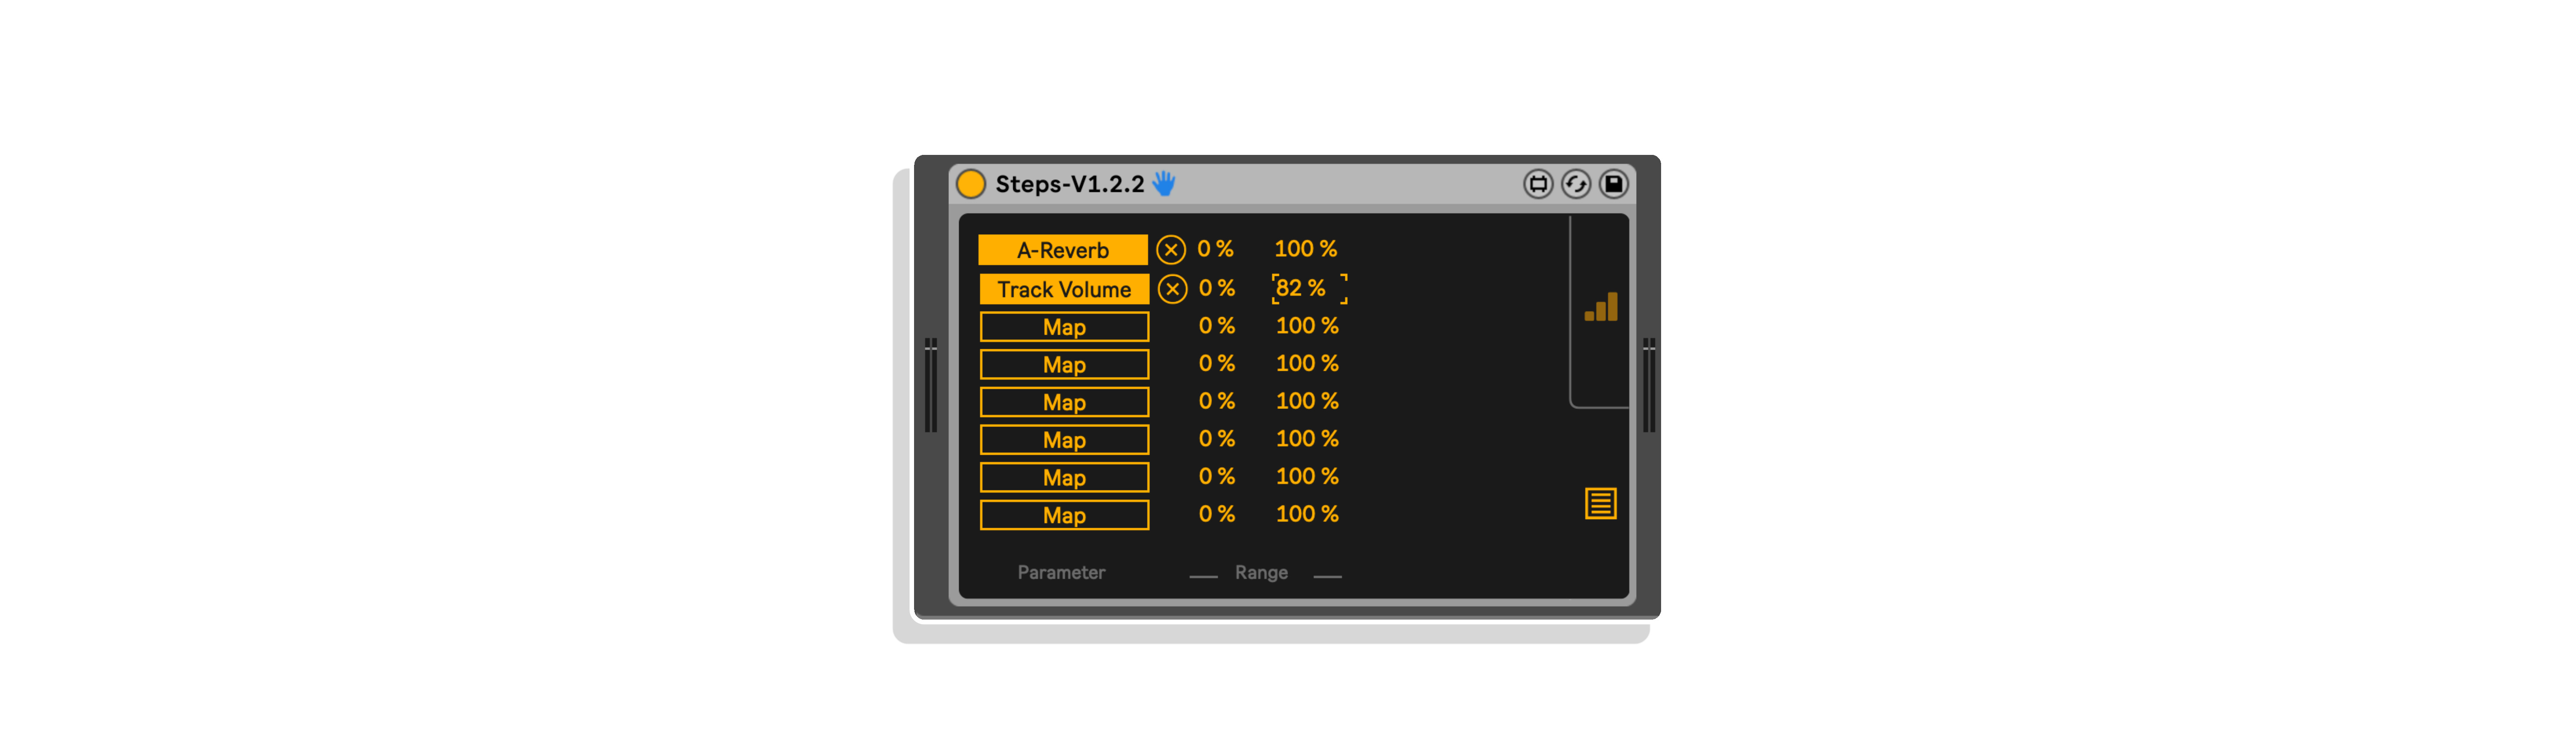 Steps 1.2 MaxforLive Device for Ableton Live by Rainbow Circuit